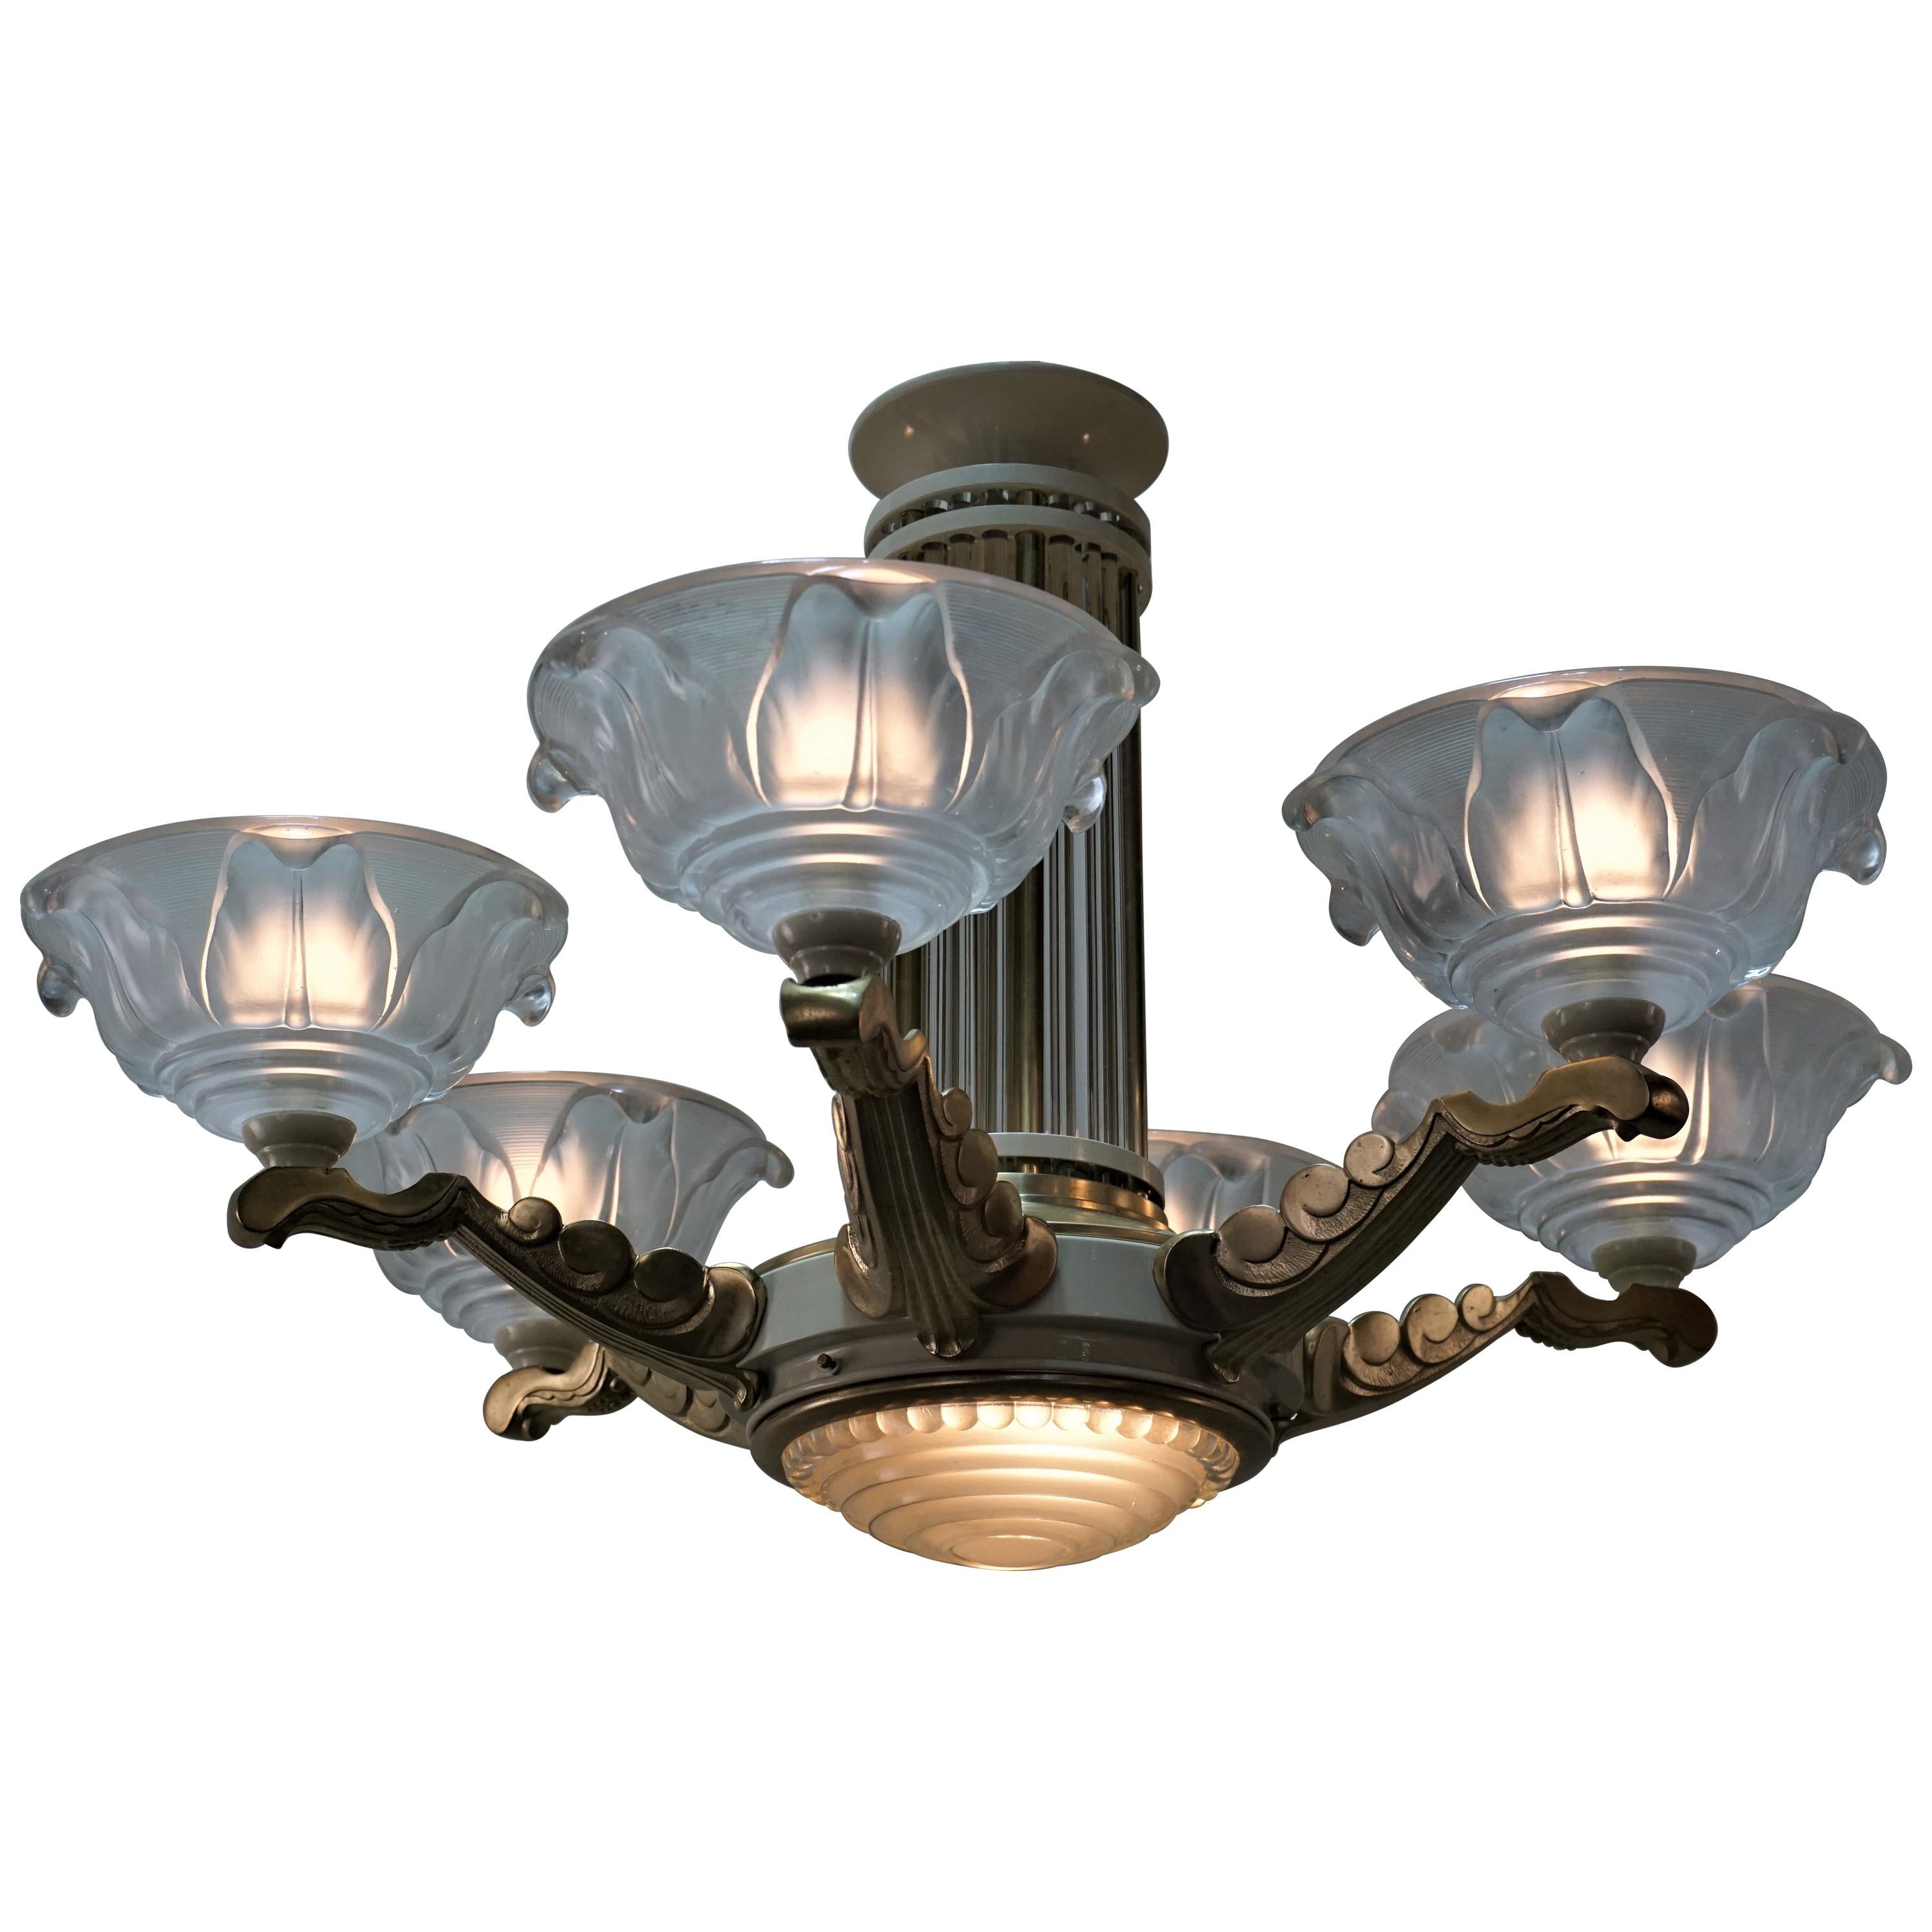 French Art Deco Chandelier by Petitot